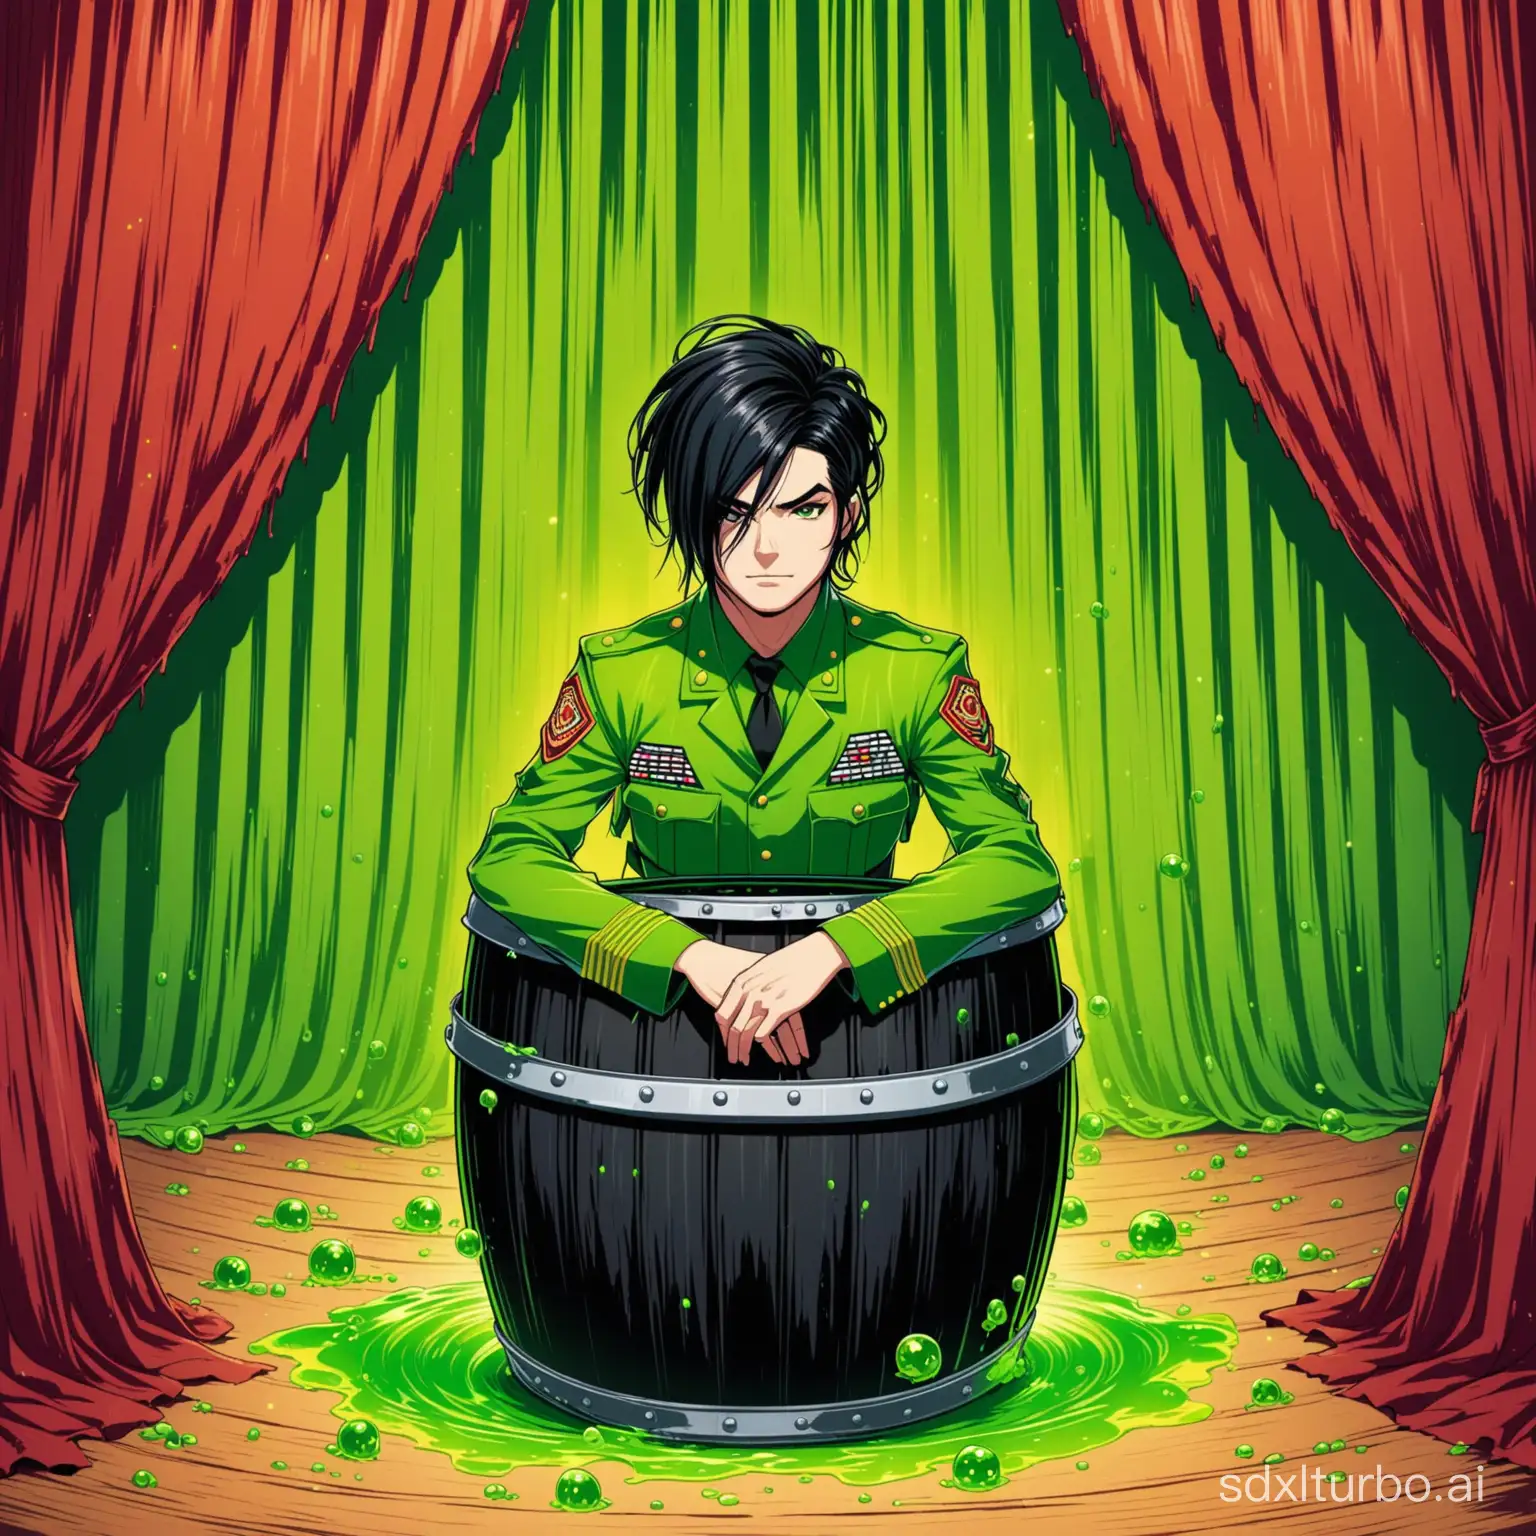 Sergeant-Toxic-Guy-with-Black-Hair-Sitting-in-Toxic-Barrel